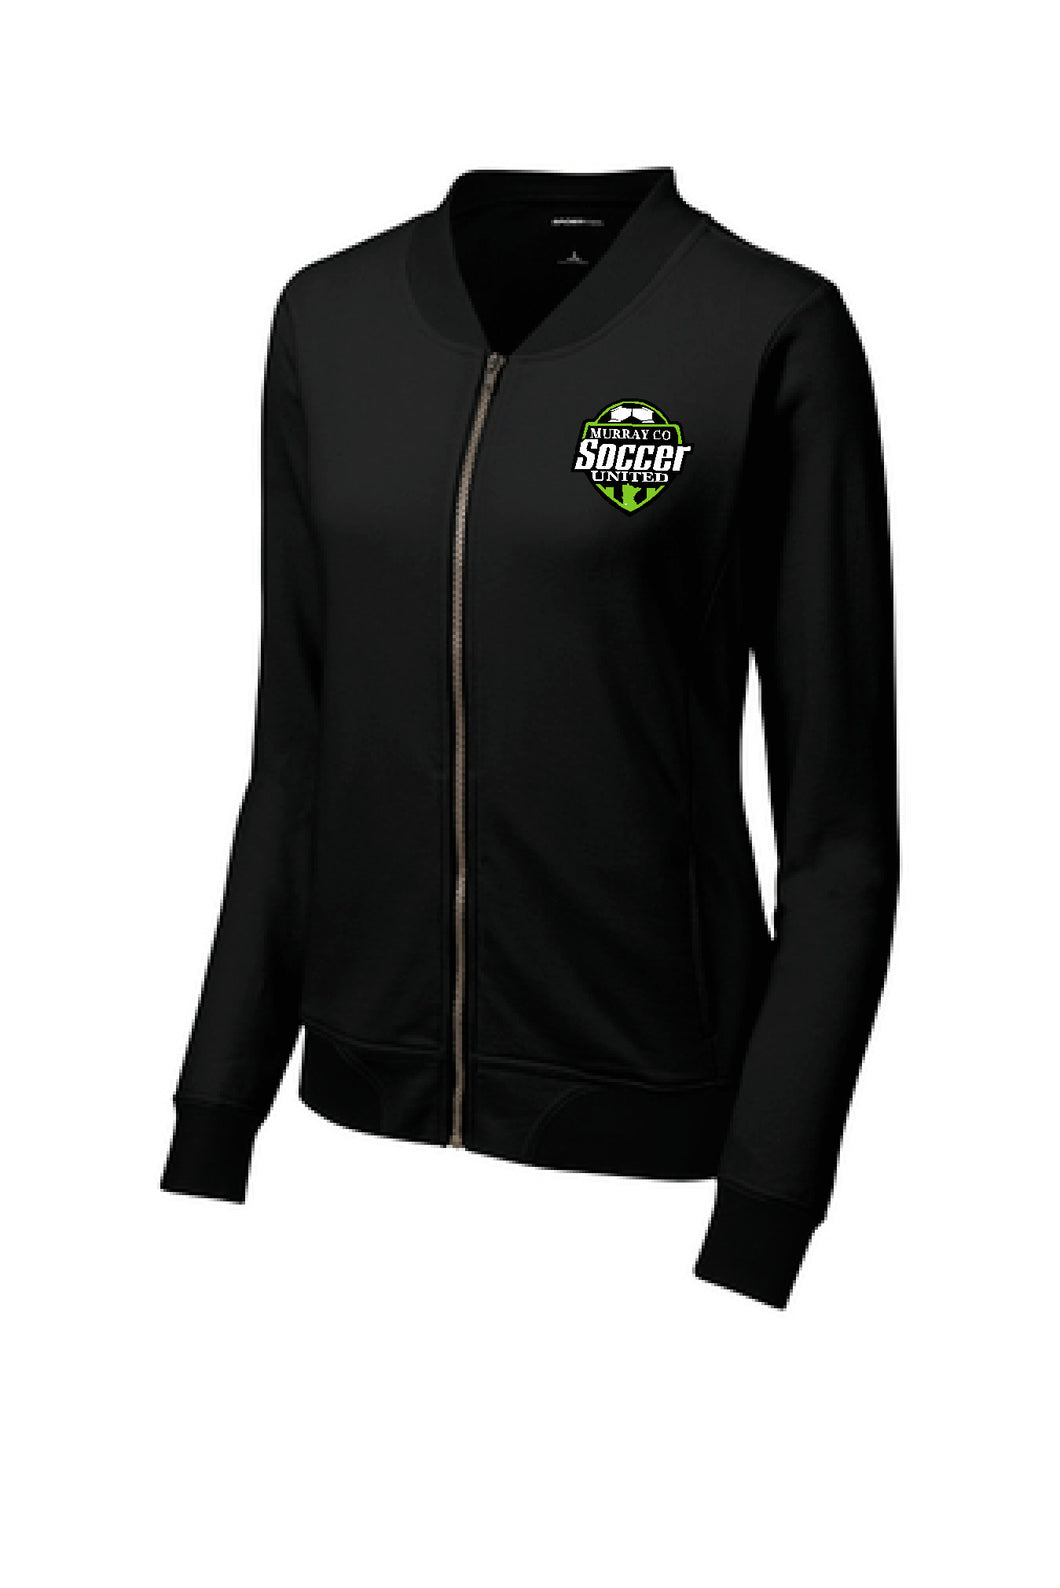 MURRAY COUNTY SOCCER UNITED FRENCH TERRY BOMBER FULL ZIP MENS OR LADIES  JACKET